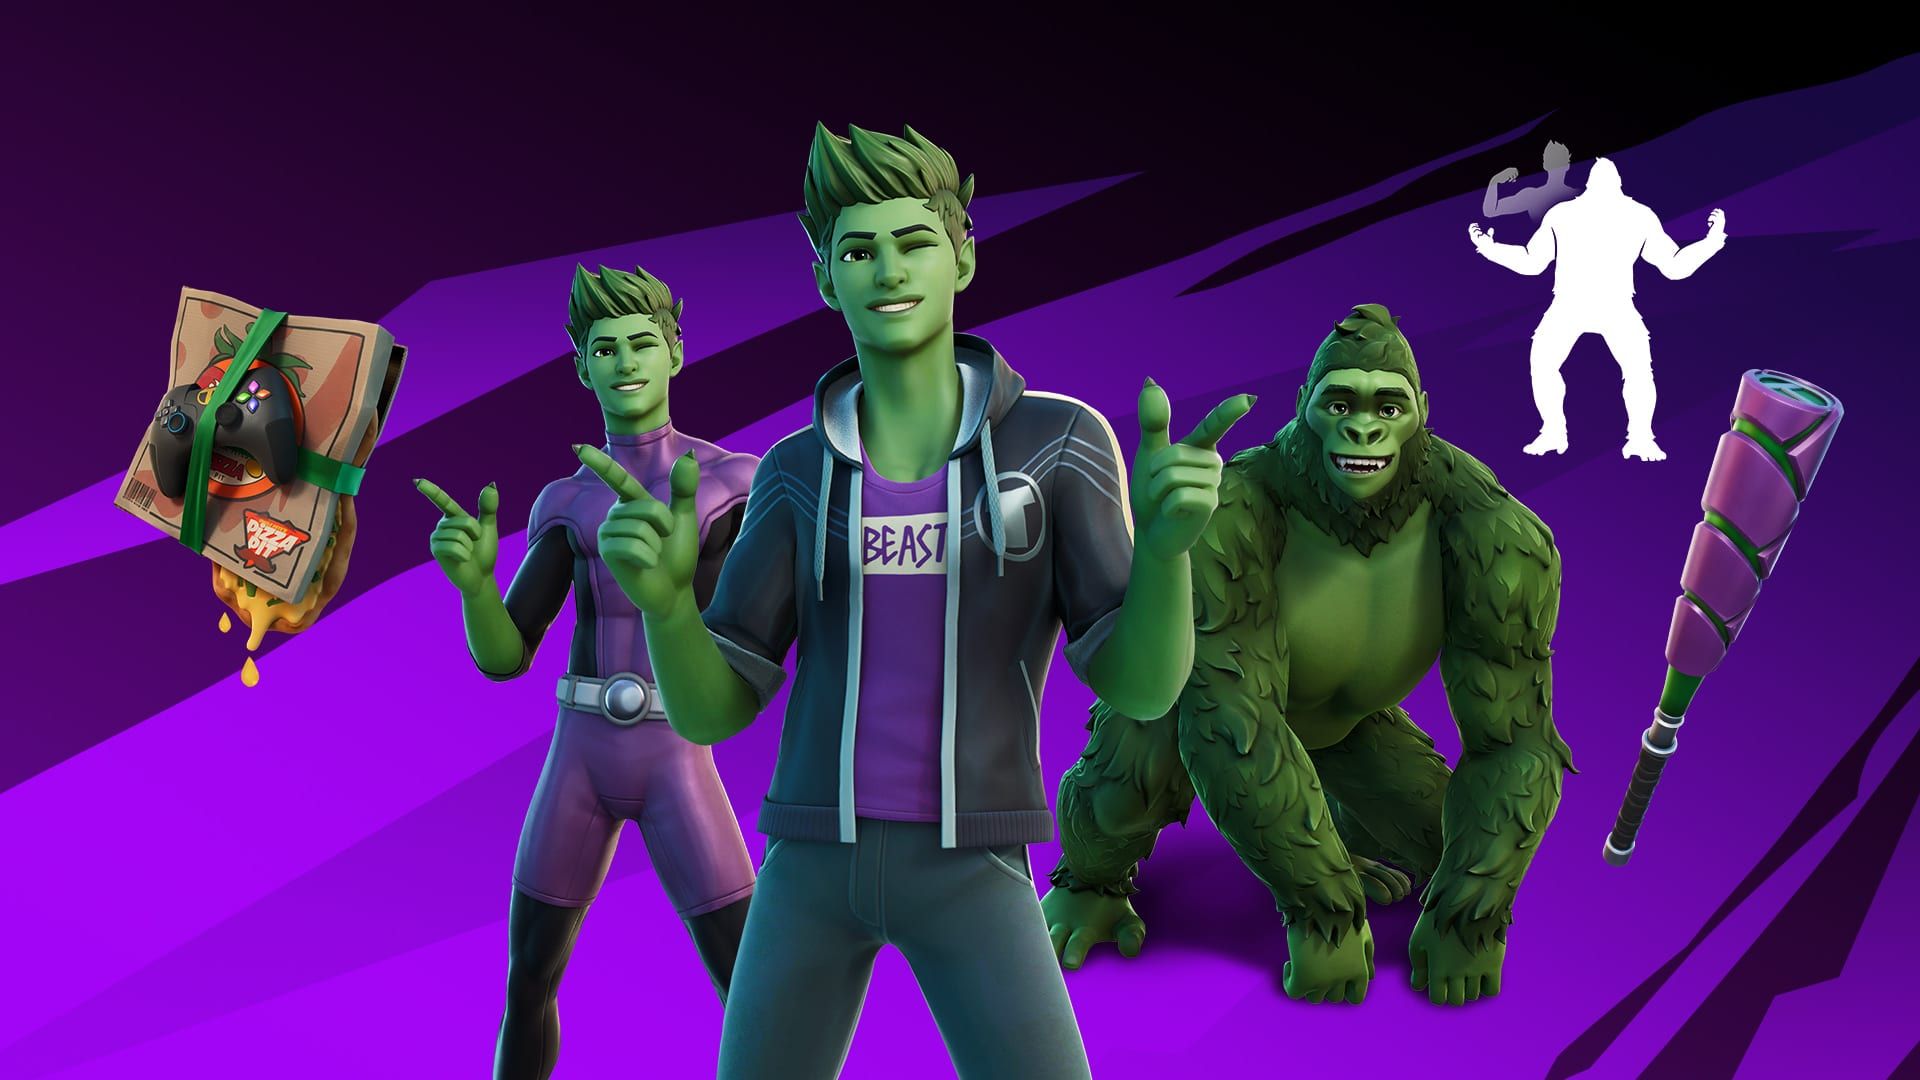 Beast Boy joins Raven in Fortnite to get the skin and gear